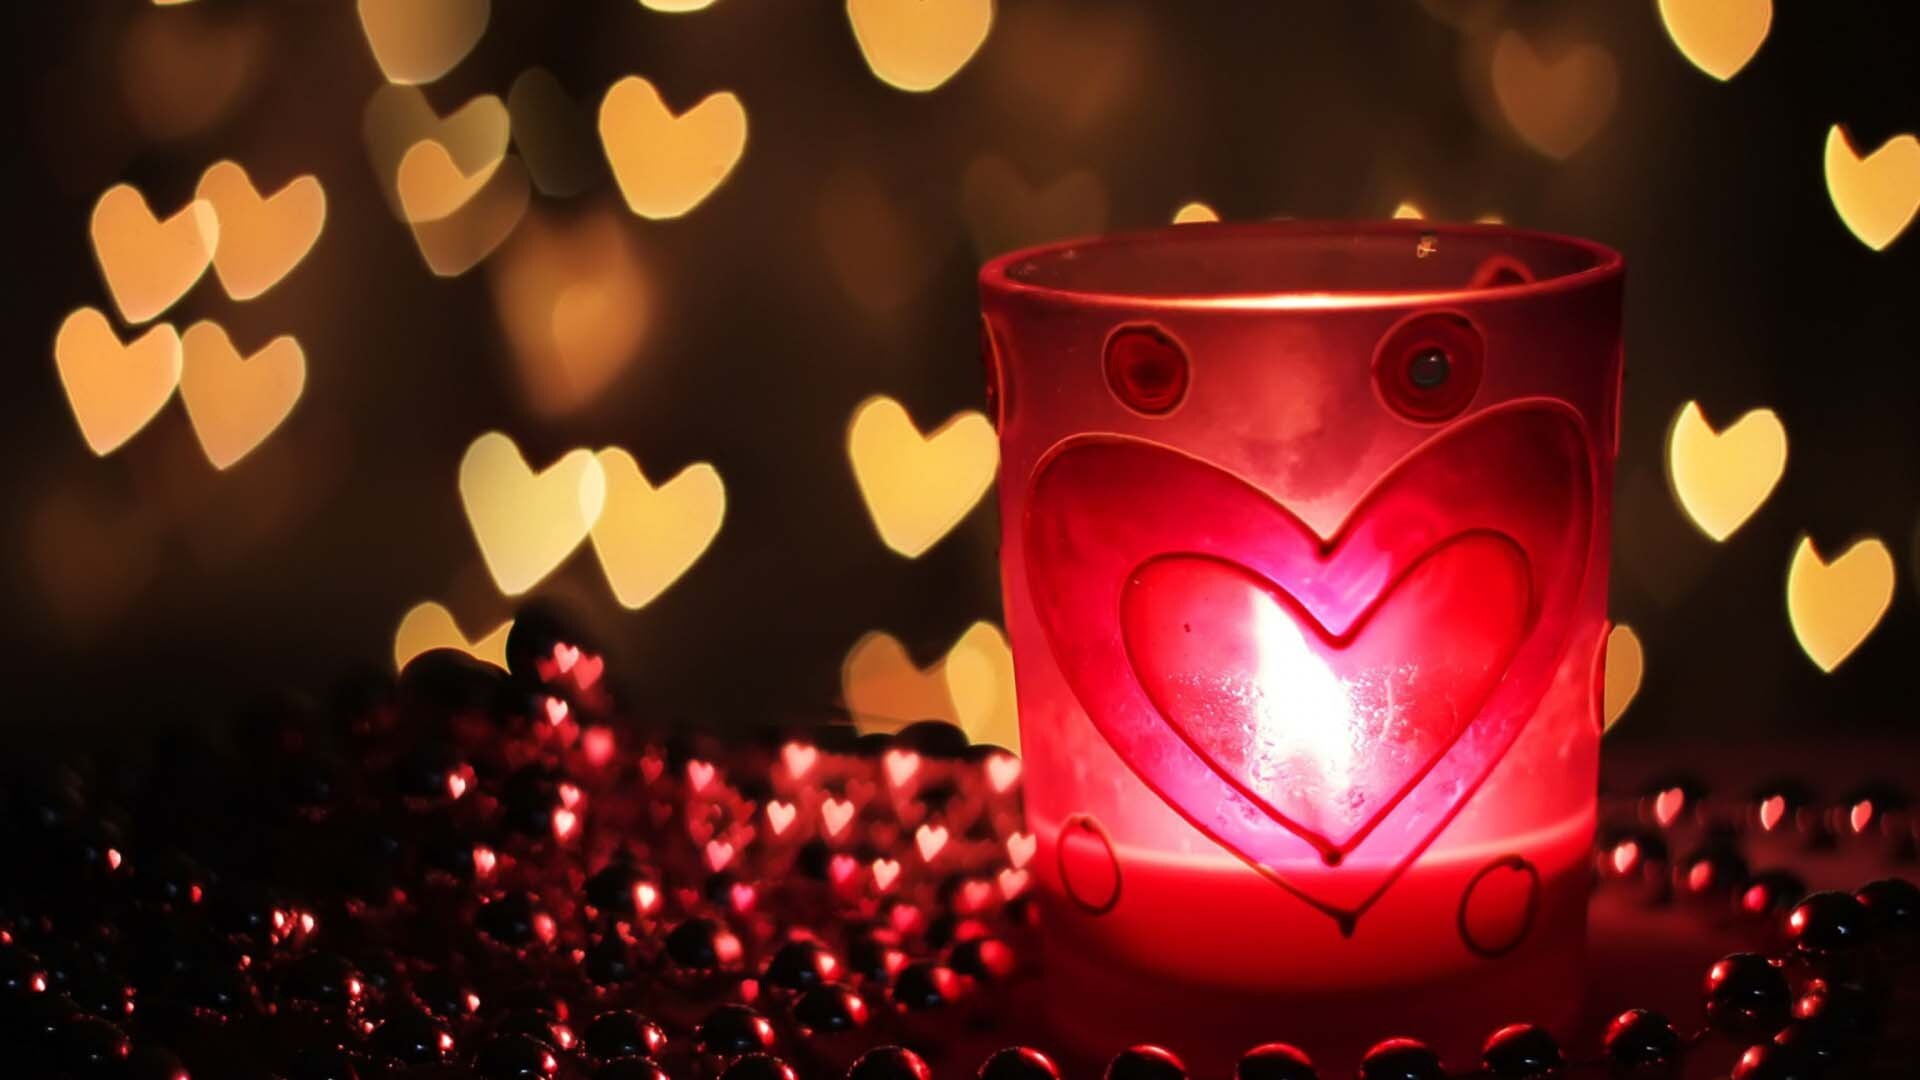 Girly: St. Valentine's Day, Heart-shaped candle, Pearls, Bright light. 1920x1080 Full HD Background.